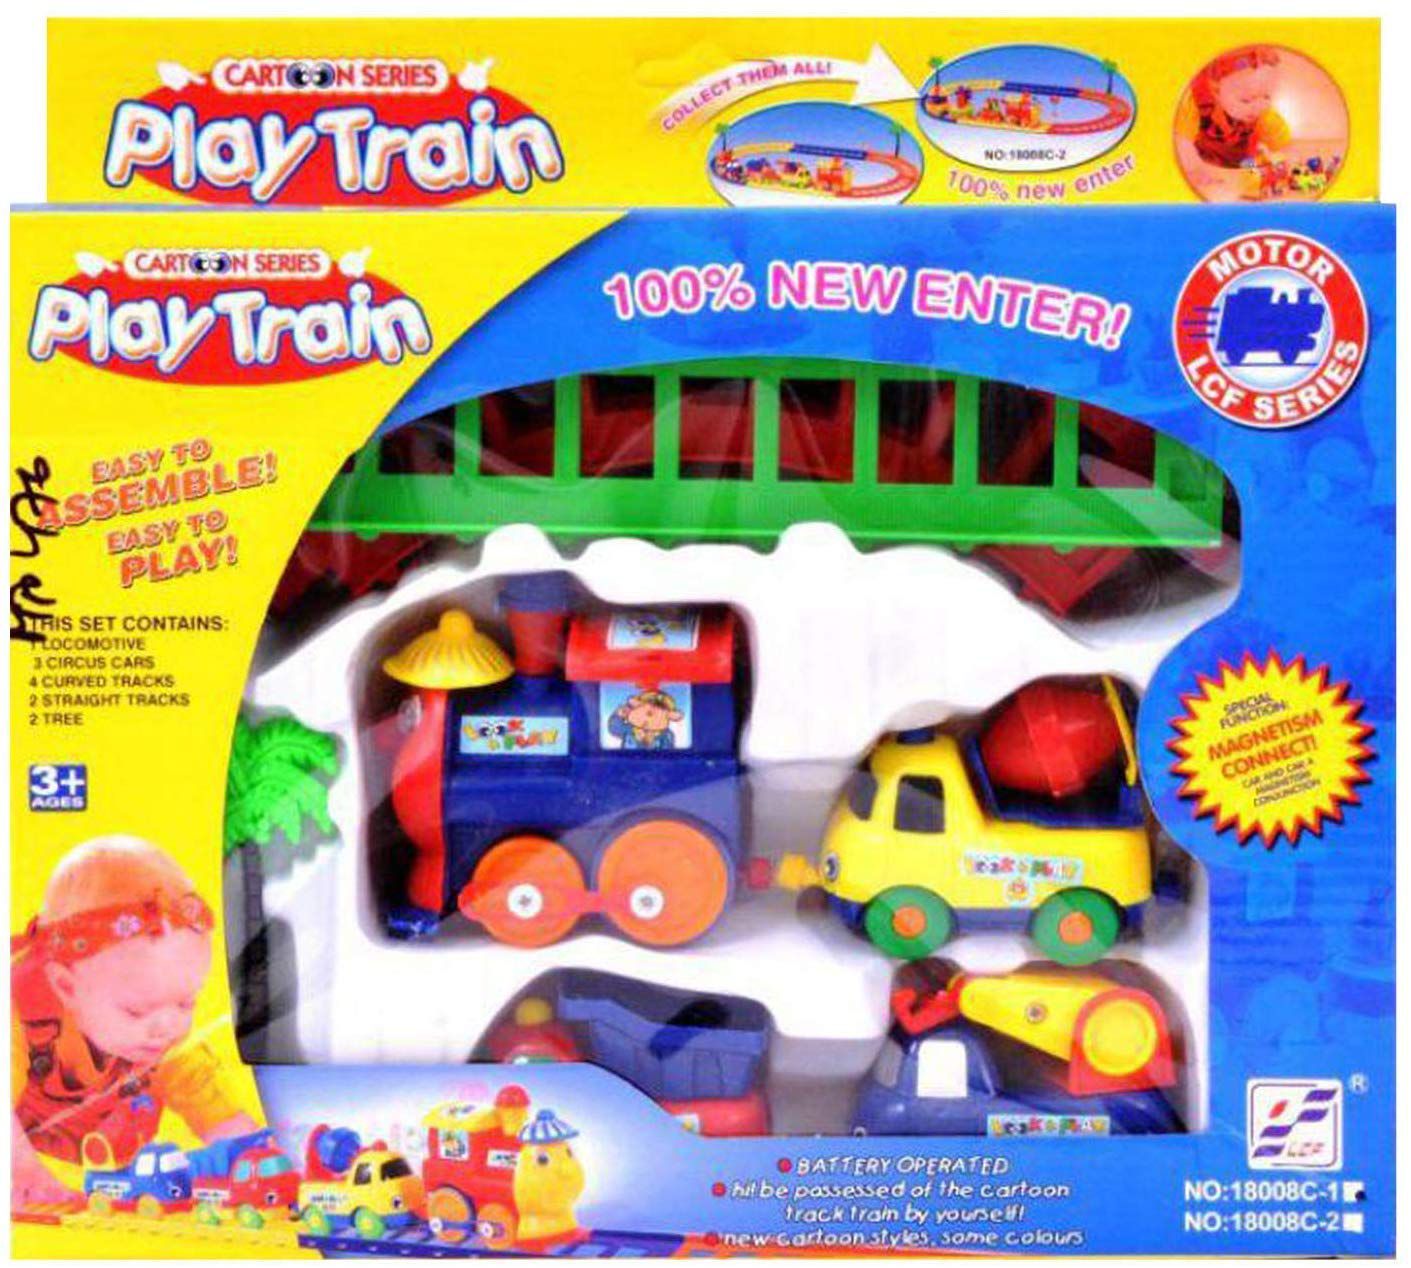 RIGHTWAY Mini Play Cartoon Series Plastic Train with Track with 4 Attach  (Multicolour) - Buy RIGHTWAY Mini Play Cartoon Series Plastic Train with  Track with 4 Attach (Multicolour) Online at Low Price - Snapdeal